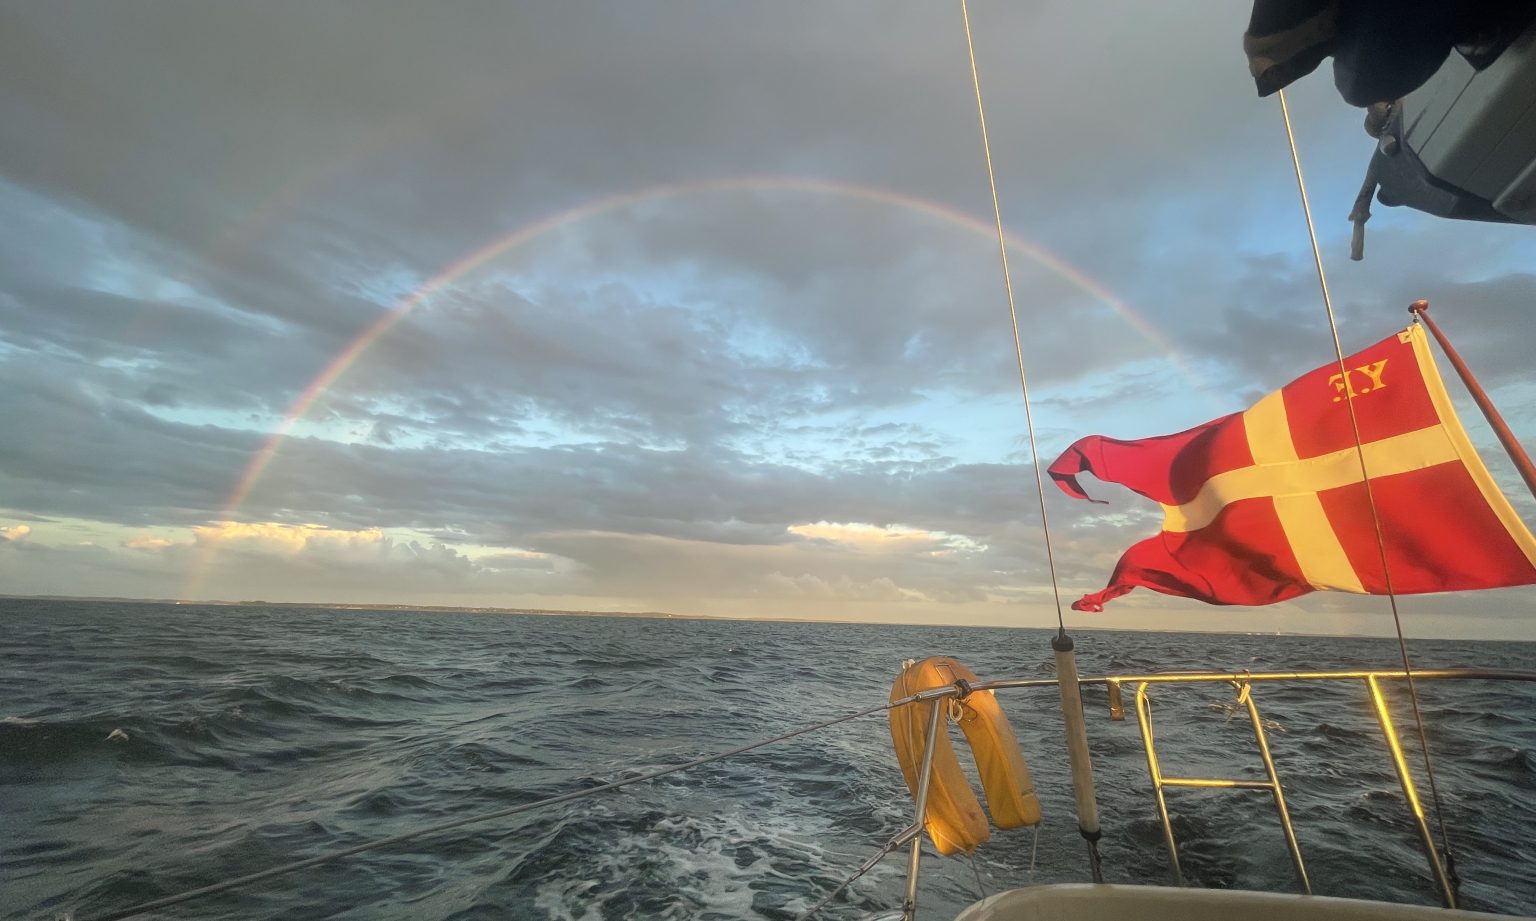 Sailing boat on sea with rainy sky and rainbow. Isefjord, Denmark. Photo contributed by Brogaard to the WordPress Photo Directory.